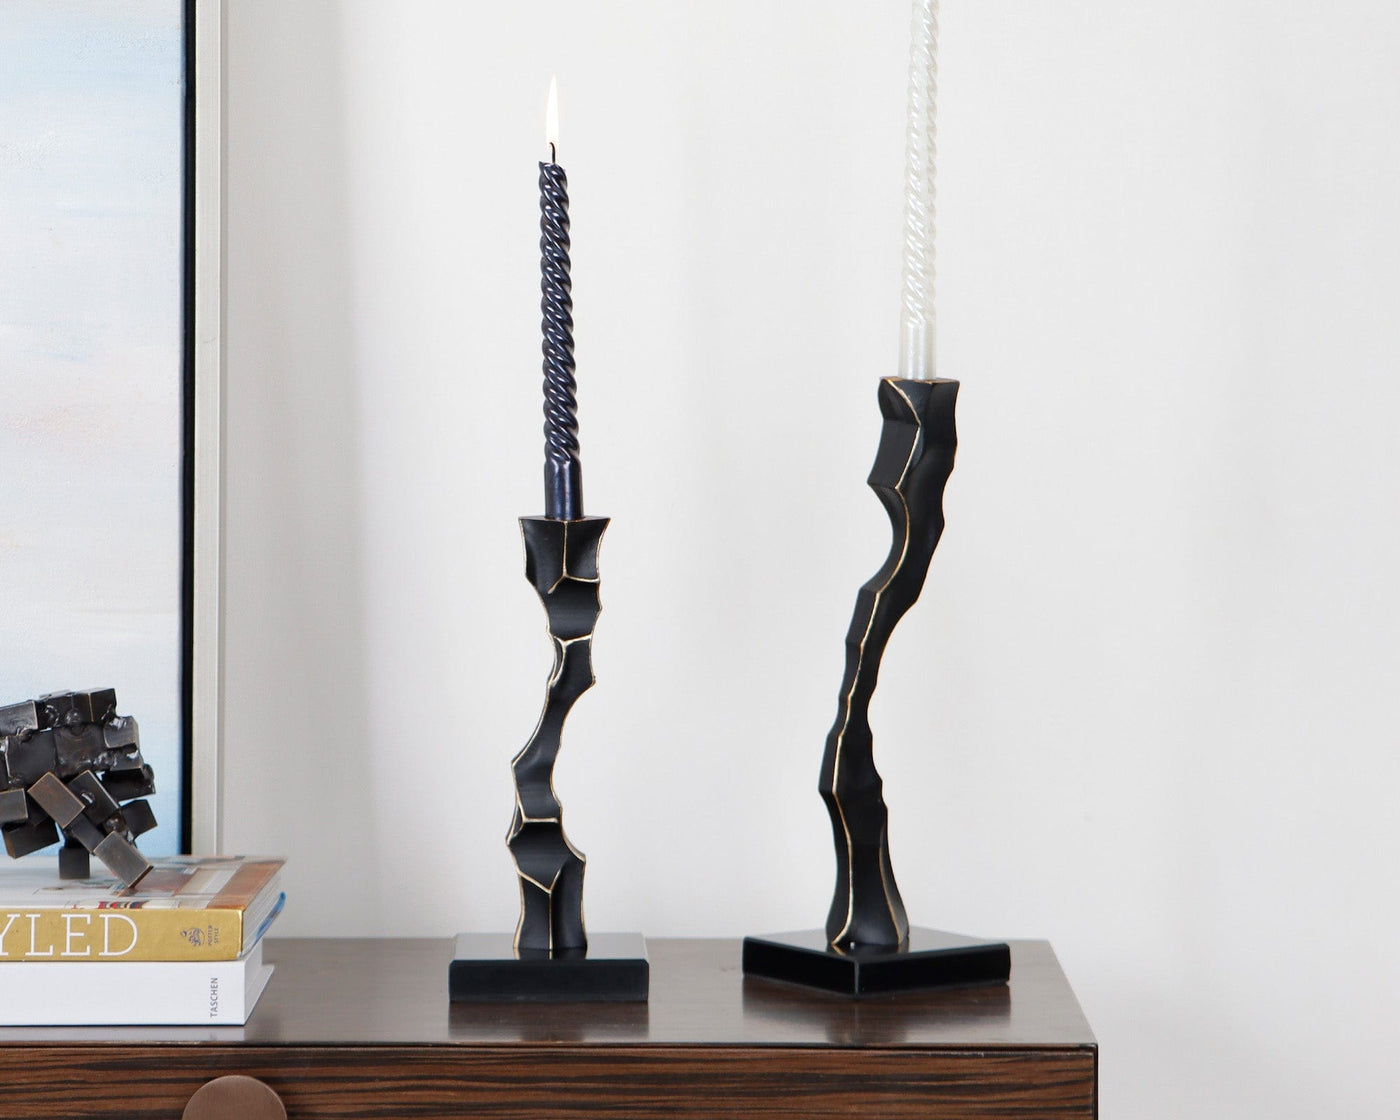 Liang & Eimil Accessories Storm Candlestick - Black Marble & Resin - Small House of Isabella UK